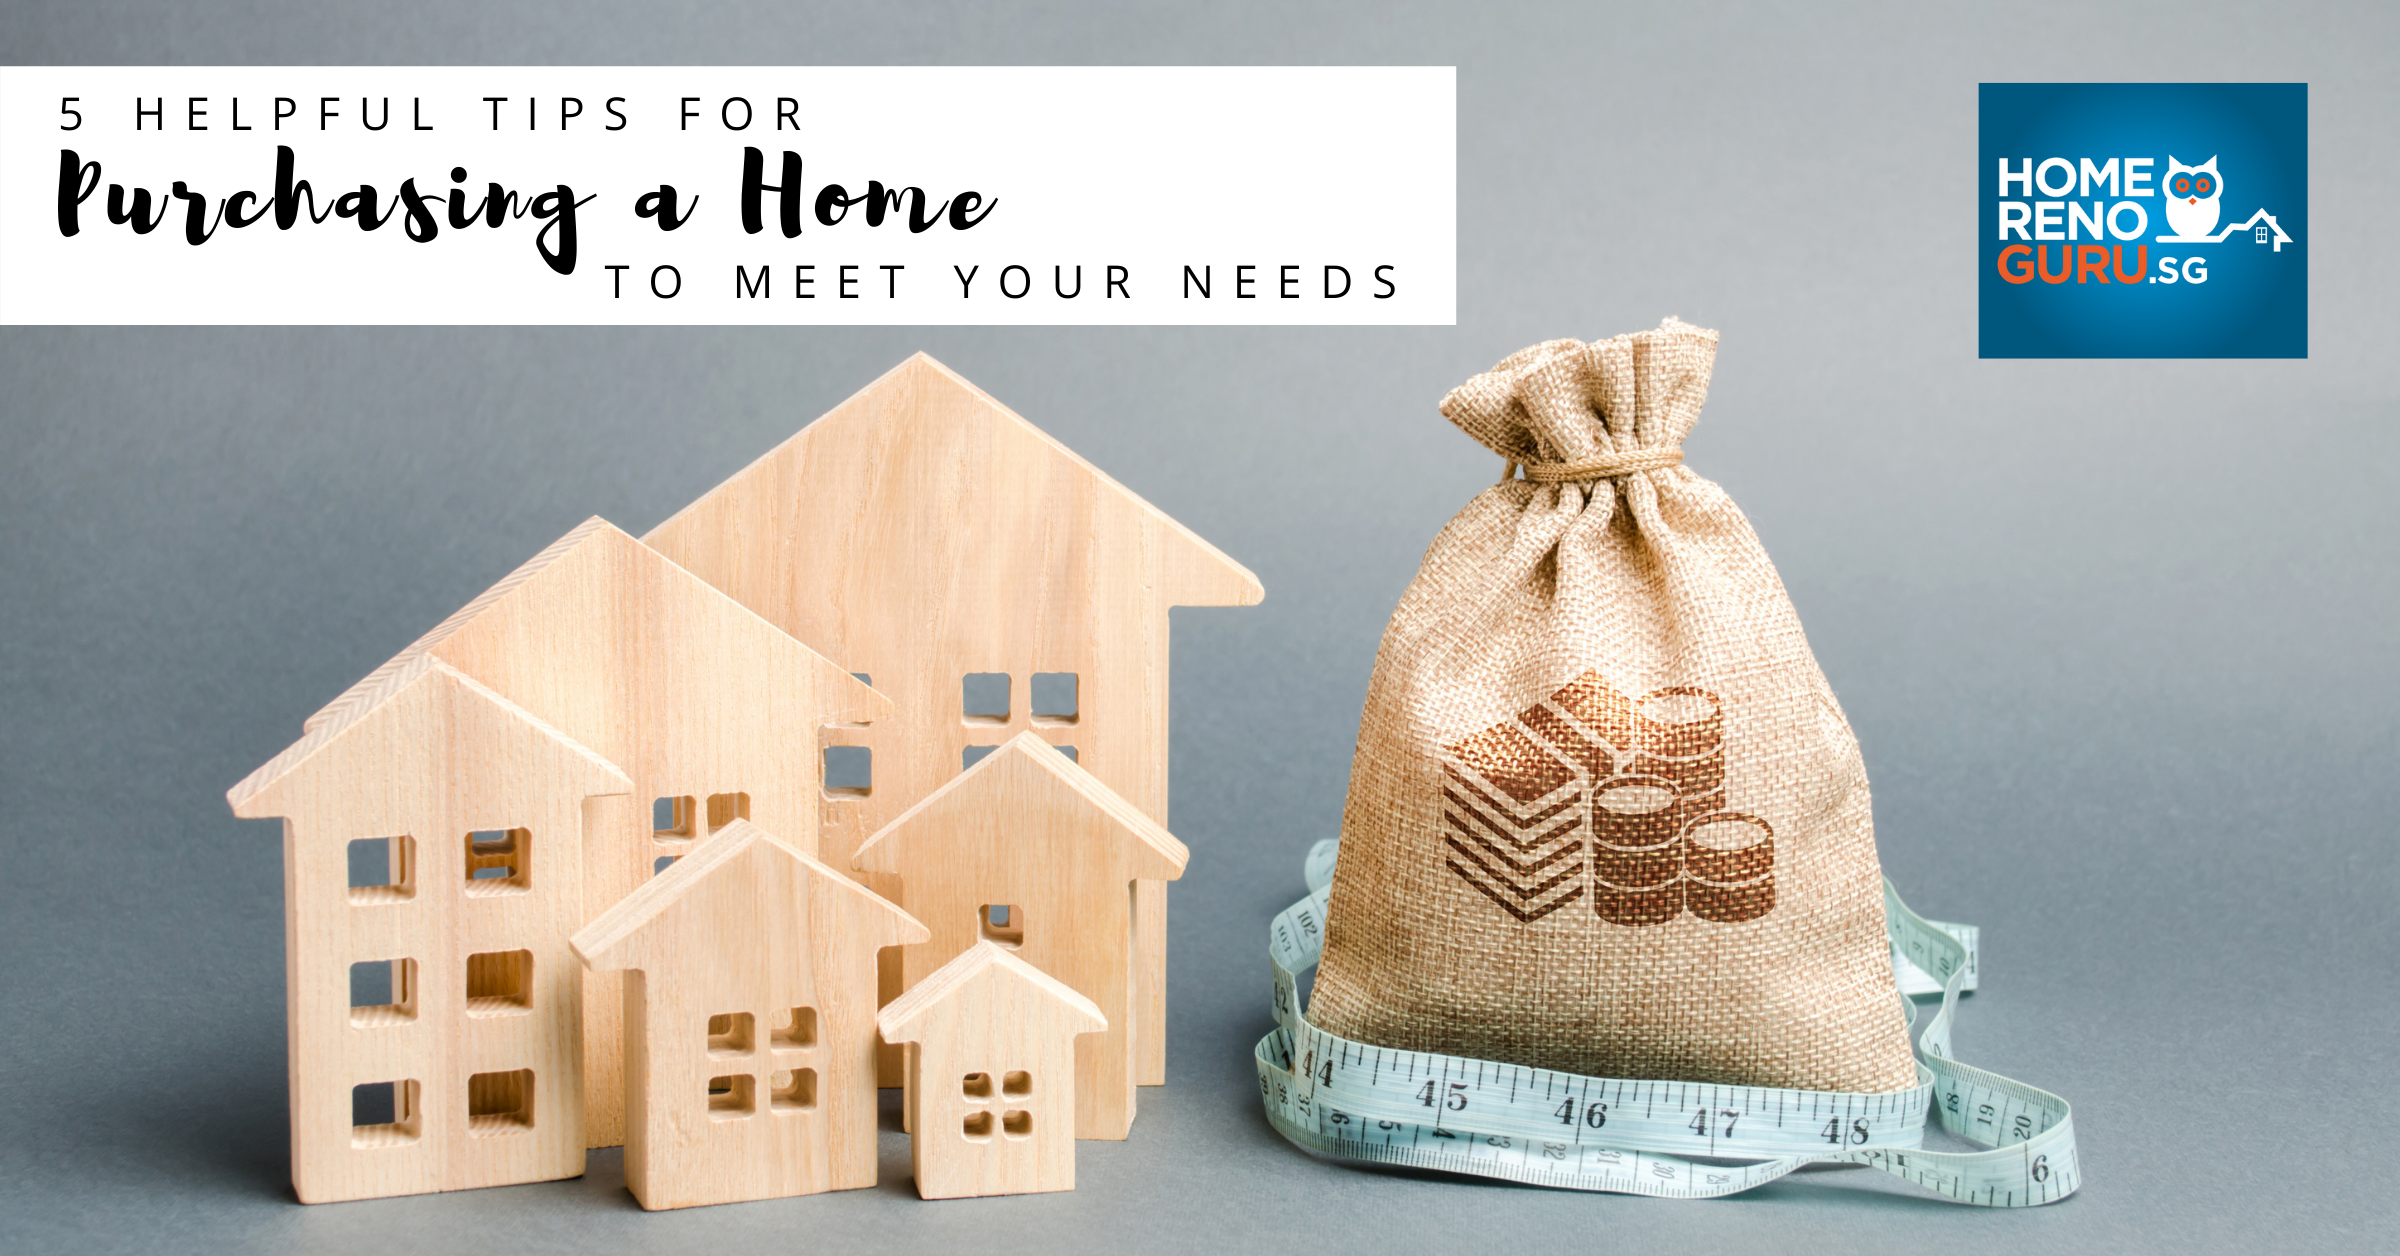 5 Helpful Tips for Purchasing a Home to Meet Your Needs